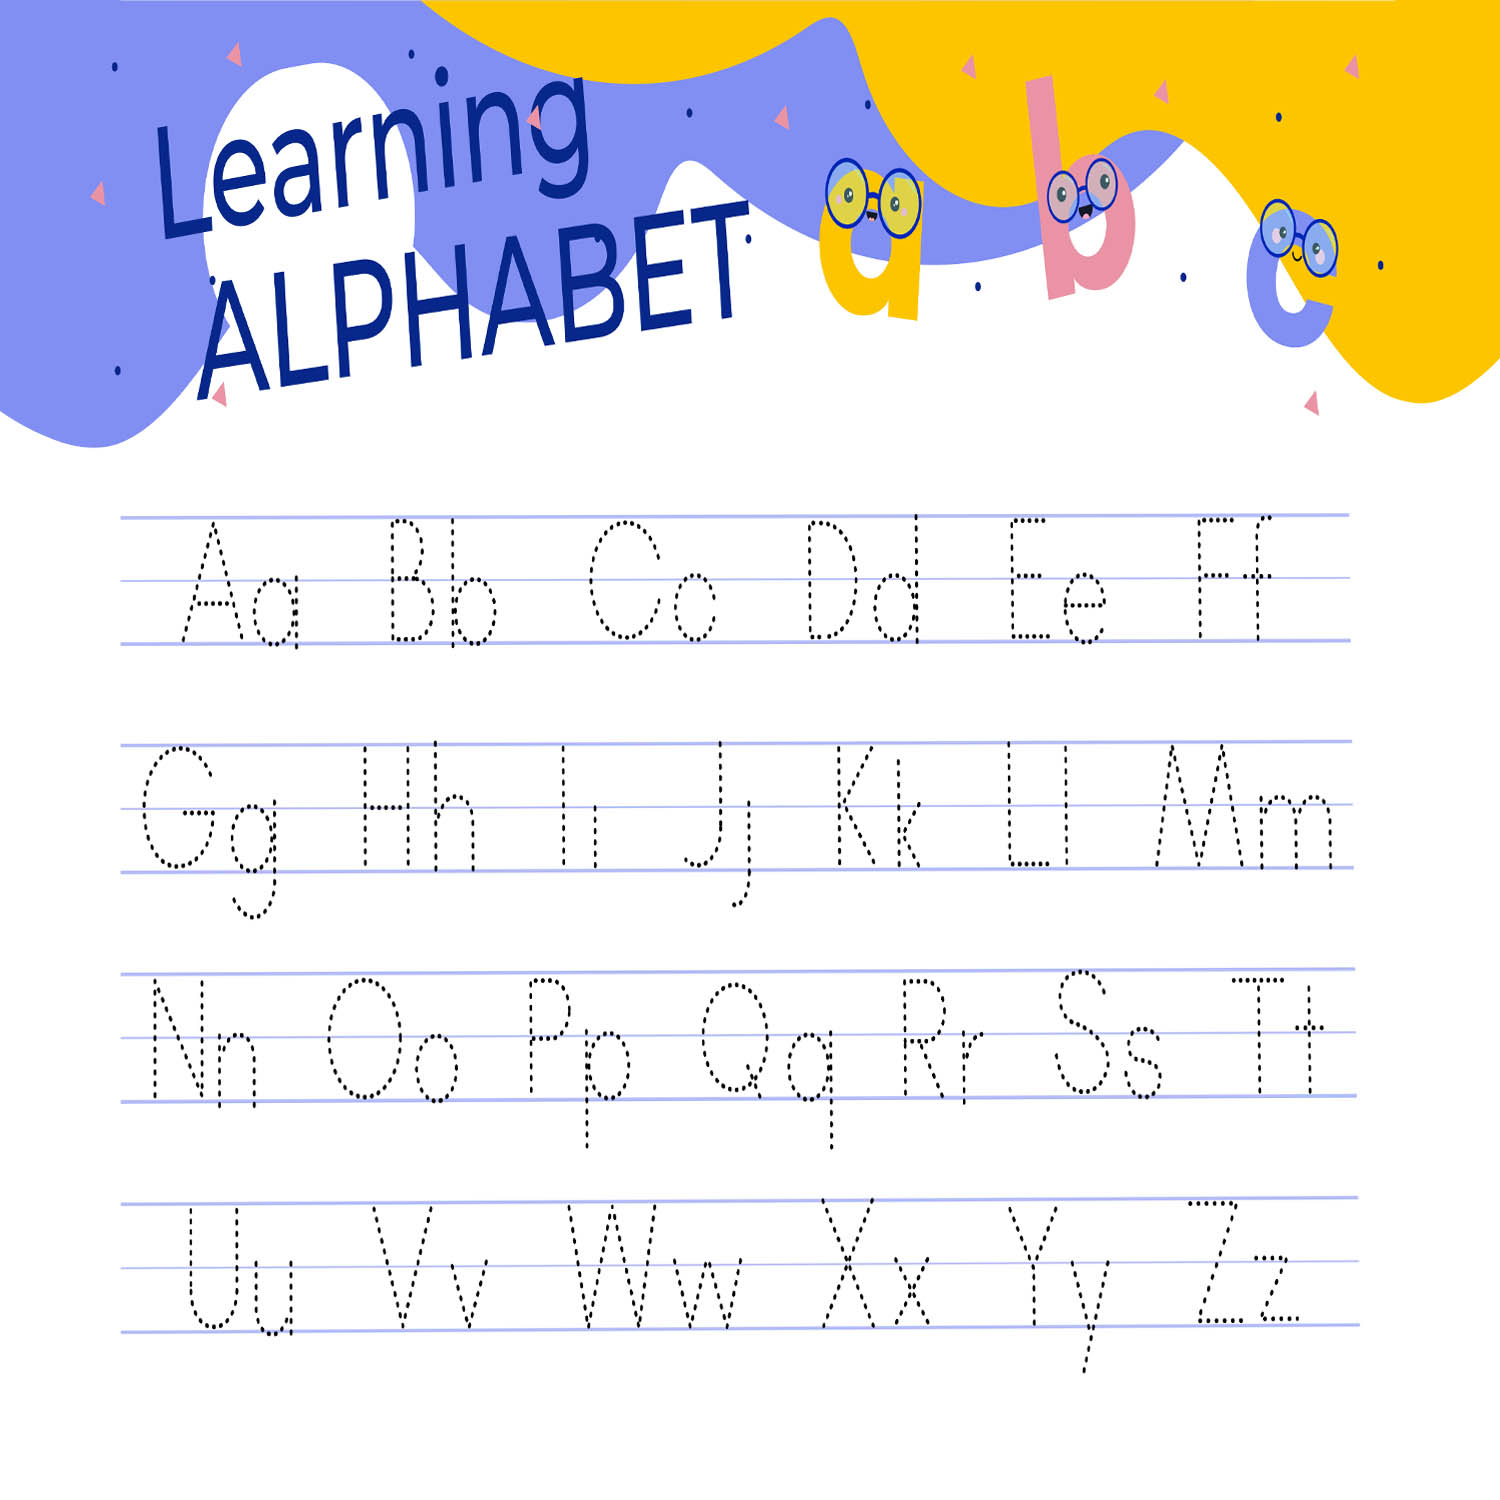 ntroducing the Master Bundle of Alphabet Tracing Worksheets - the perfect tool for helping kids learn the ABCs in a fun and engaging way! This bundle includes a wide variety of worksheets for every letter of the alphabet, all expertly designed to help young learners practice their handwriting and letter recognition skills Each worksheet features a large, bold letter for tracing, along with accompanying images that start with that letter to reinforce vocabulary and phonetic awareness These worksheets are perfect for parents, teachers, and homeschoolers looking for a comprehensive and easy-to-use resource for teaching the ABCs The worksheets are suitable for children aged 3-6 years old and are ideal for use in the classroom or at home With this Master Bundle, you'll have access to a wide variety of different tracing styles, including print, cursive, and lowercase letters, so you can choose the best fit for your child's learning needs Plus, with the bundle's affordable price, you'll have a wealth of resources at your fingertips for a fraction of the cost it would take to create custom worksheets So whether you're a parent looking to give your child a head start in their education, or a teacher seeking a versatile and effective tool for your classroom, the Master Bundle of Alphabet Tracing Worksheets is the perfect solution Get your bundle today and help your child master the ABCs with ease! User passive income for graphic designer ChatGPT As a graphic designer, there are several passive income streams you can explore to generate revenue without actively trading time for money Here are a few ideas to get you started: Sell digital products: You can create and sell digital products such as fonts, icons, illustrations, templates, and graphics on platforms like Creative Market, Etsy, or your own website Once you've created your product, you can continue to earn revenue from it without any additional effort Sell print-on-demand products: Another option is to create designs for print-on-demand products like t-shirts, mugs, or phone cases, and sell them through platforms like Redbubble or Society6 You'll earn a commission on each sale without having to handle production or shipping License your designs: You can also license your designs to companies or individuals for use in their own products or projects For example, you could license your designs for use in greeting cards, book covers, or websites You'll earn royalties on each use of your design Create and sell courses: If you have expertise in a particular area of graphic design, you could create an online course or tutorial series and sell it on platforms like Udemy or Skillshare Once you've created the course, you'll earn passive income from each sale Build an affiliate marketing program: Finally, you could build an affiliate marketing program for your digital products or services This involves partnering with other websites or influencers who promote your products to their audiences You'll earn a commission on each sale that comes from their referral Remember, building a passive income stream takes time and effort upfront But once you've created your product or established your program, it can generate revenue for years to come with minimal ongoing effort So start exploring your options and find the best fit for your skills and interests! User in which platform ChatGPT There are several platforms you can use to generate passive income as a graphic designer Here are some examples: Creative Market: This platform allows you to sell digital products like fonts, icons, illustrations, templates, and graphics to a global audience of designers and creatives Etsy: Etsy is an online marketplace where you can sell handmade or vintage items, including digital products like printable art, stationery, or planner inserts Redbubble: This print-on-demand platform allows you to create designs for a variety of products like t-shirts, stickers, phone cases, and home decor items Society6: Similar to Redbubble, Society6 allows you to create and sell designs for various print-on-demand products like wall art, home decor, and fashion accessories Udemy: This platform allows you to create and sell online courses on various topics, including graphic design Skillshare: Similar to Udemy, Skillshare is an online learning platform where you can create and sell courses on various subjects, including graphic design Affiliate marketing networks: You can partner with affiliate marketing networks like Amazon Associates, ShareASale, or Commission Junction to promote your products and services to a wider audience Of course, there are many other platforms and opportunities available, so it's worth researching and exploring your options to find the best fit for your skills and goals cover image.